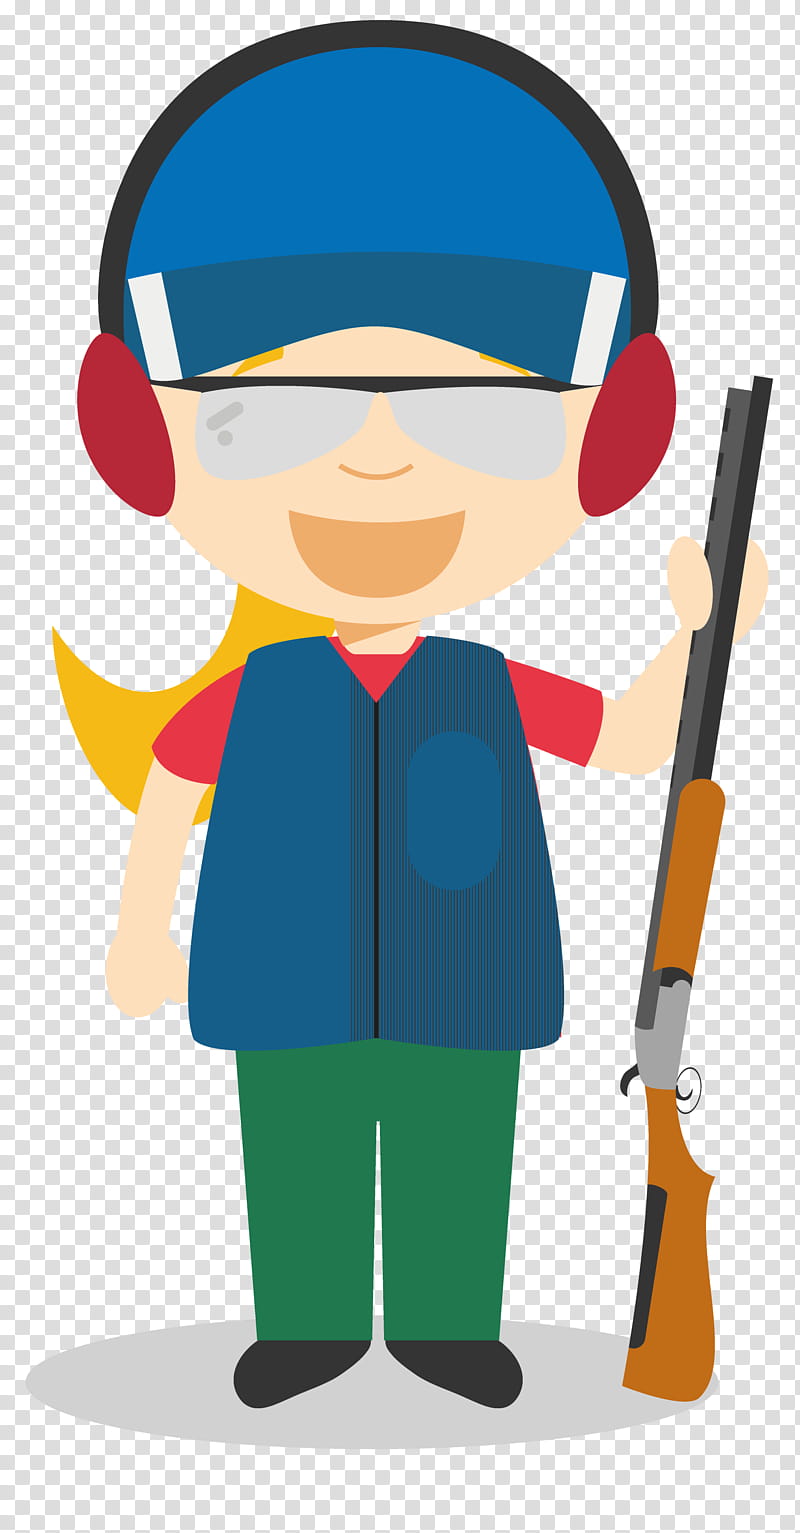 Boy, Shooting Sports, Skeet Shooting, Trap Shooting, Male, Standing, Line, Technology transparent background PNG clipart